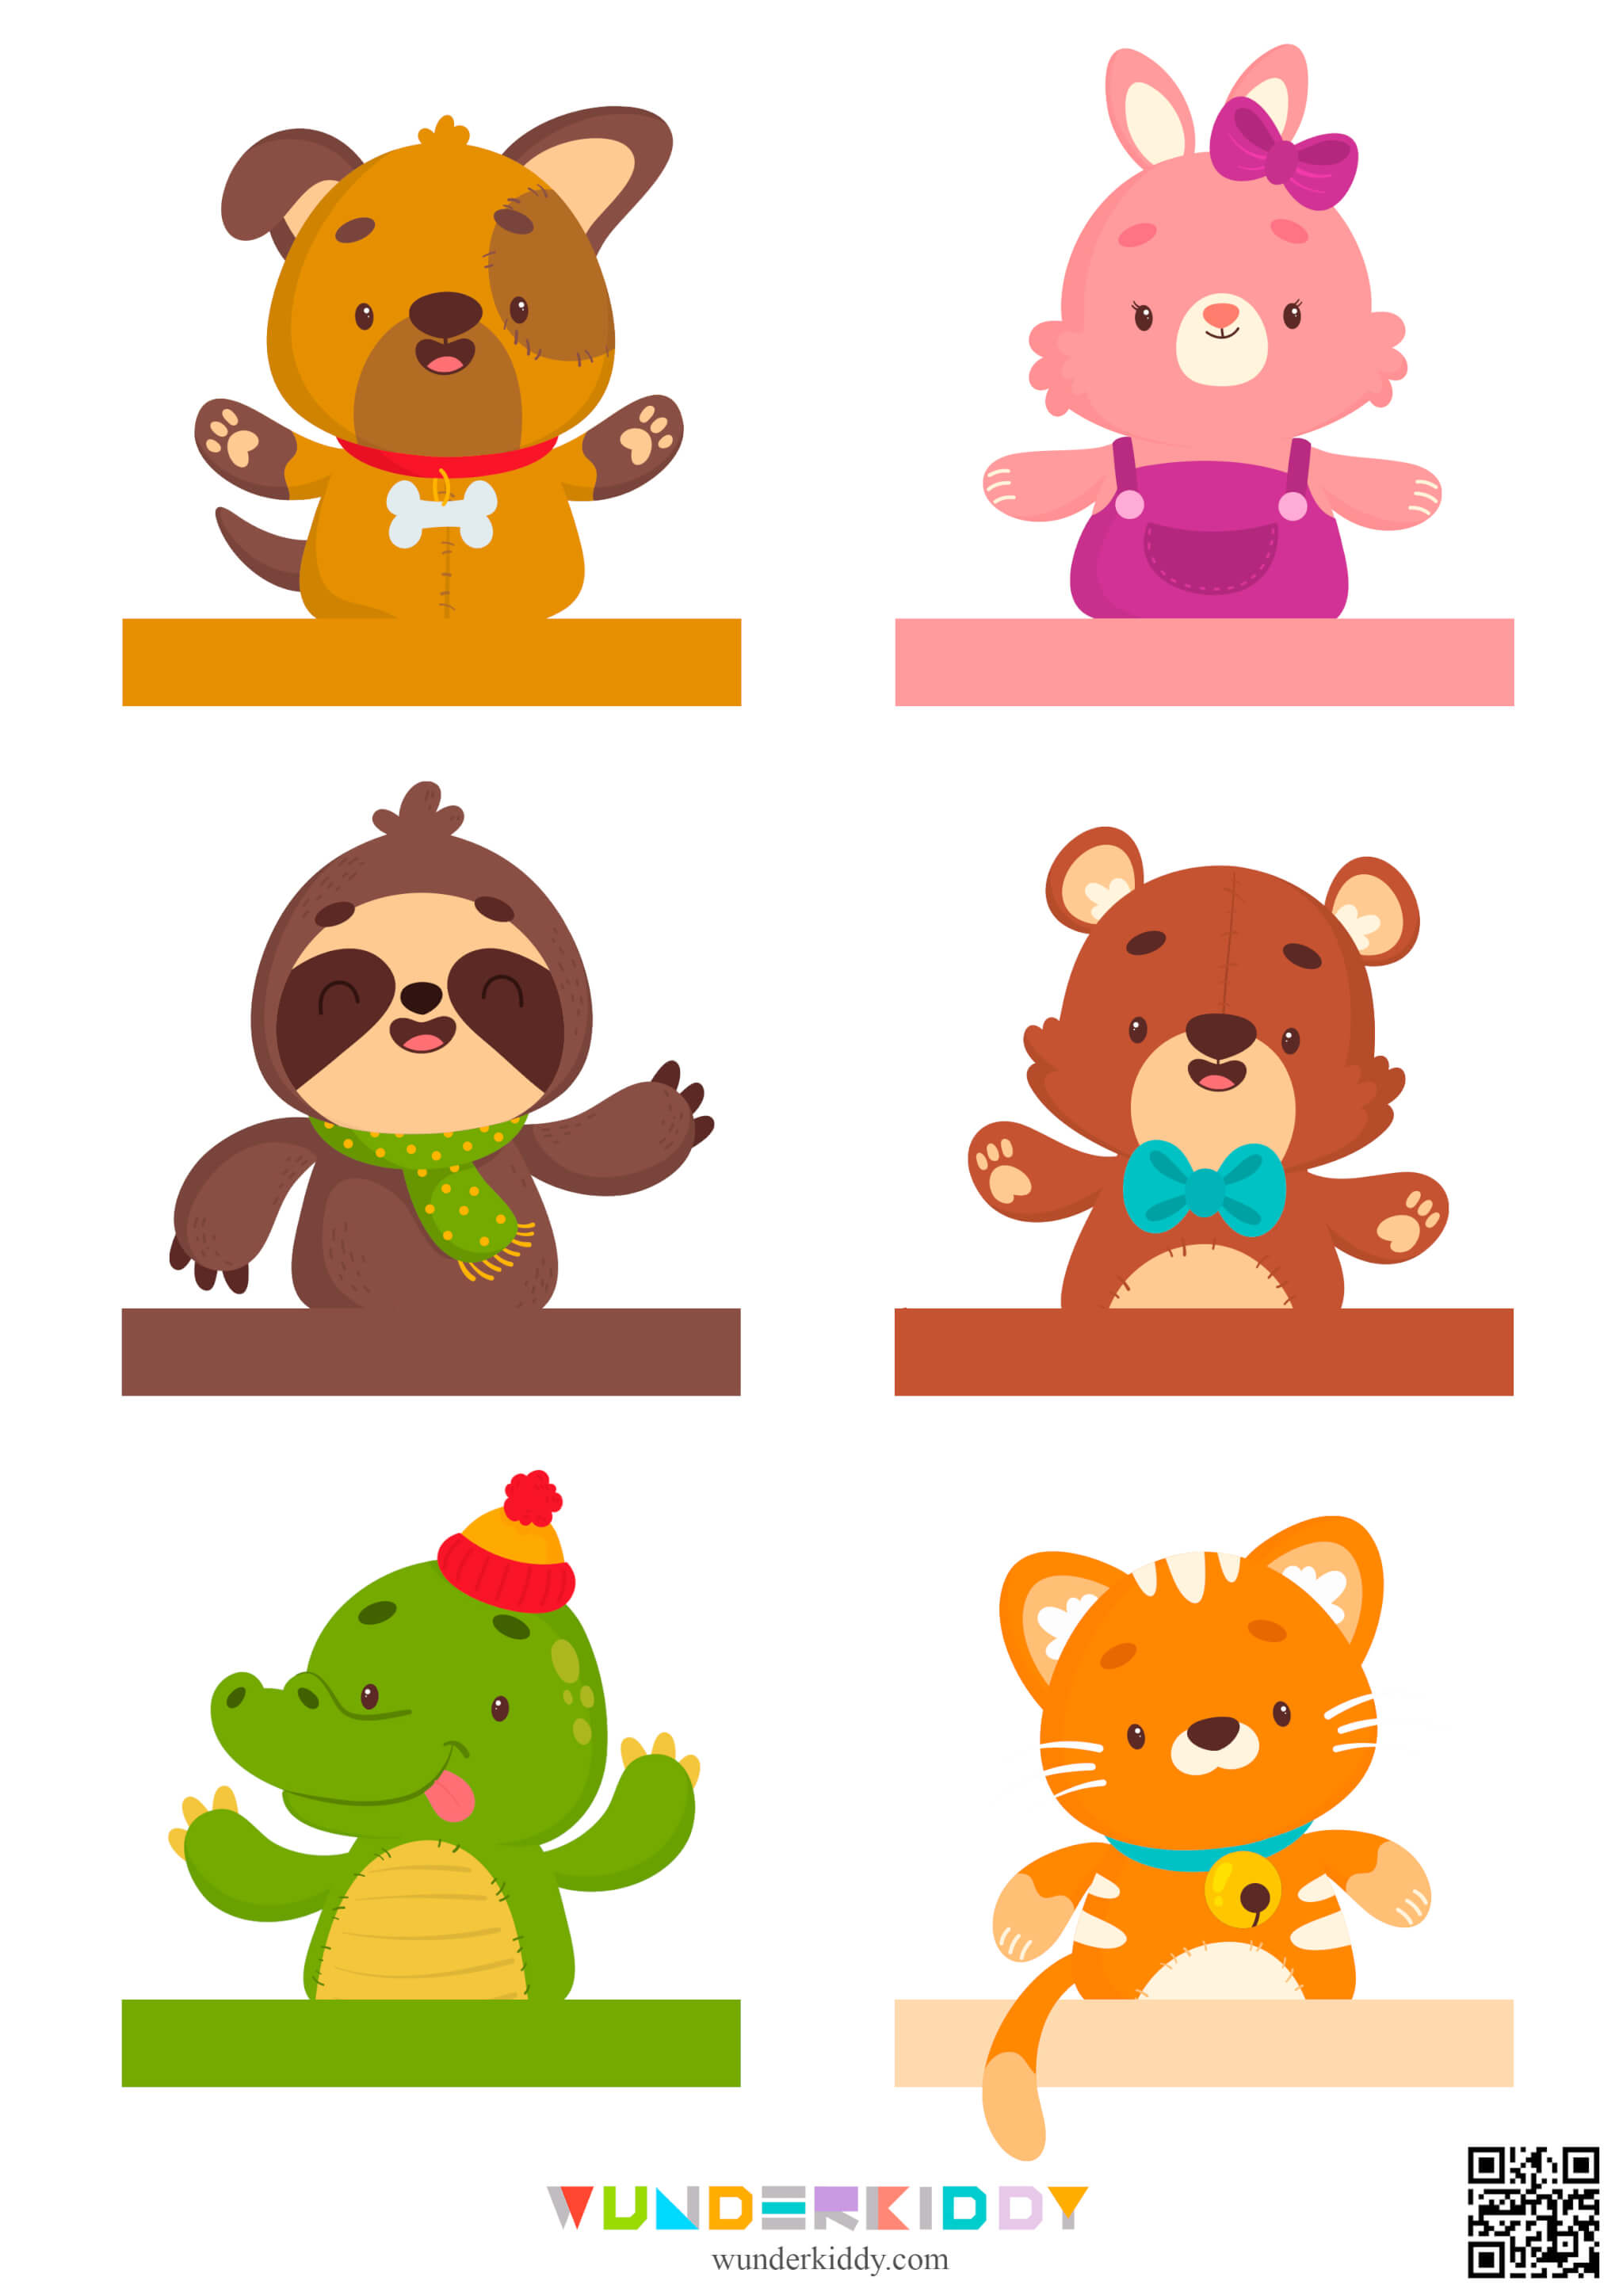 Template «Finger Puppets» - Image 5